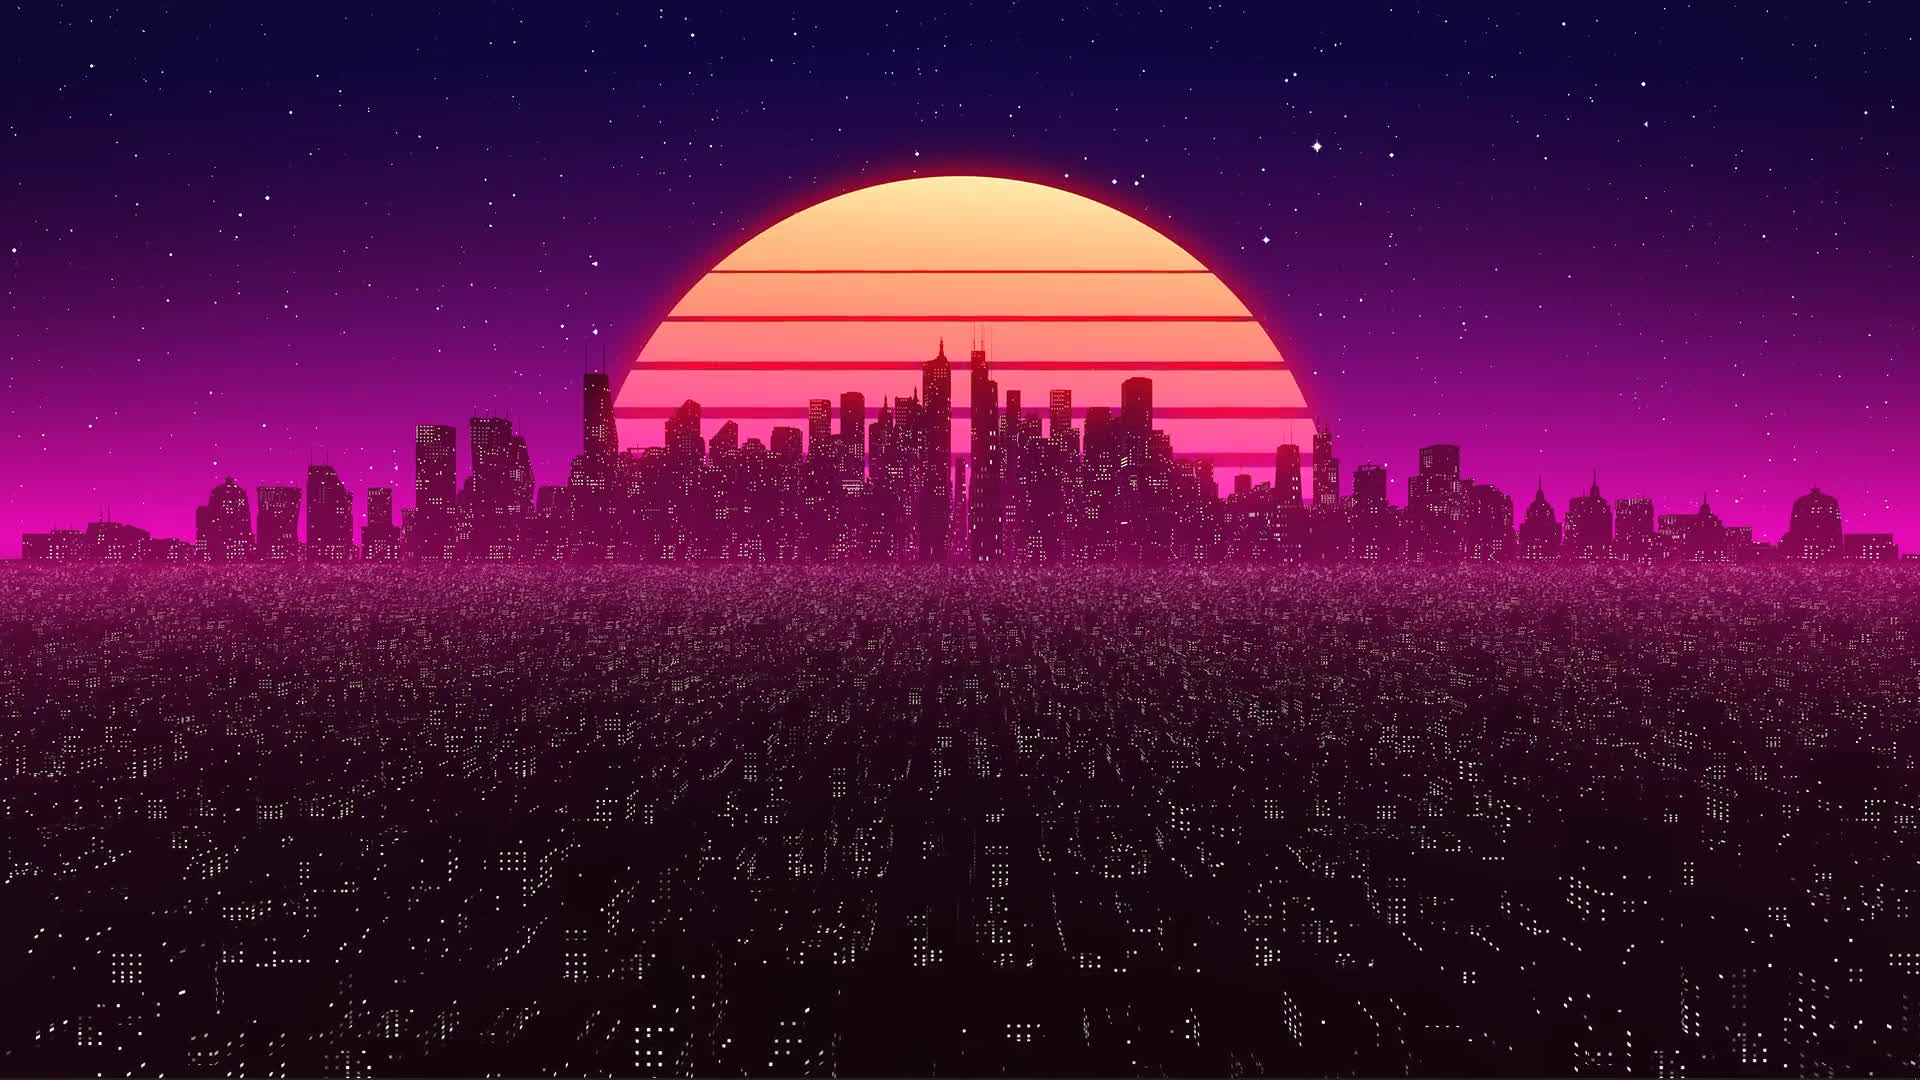 Loop Retro Synth City By Visualdon Live Wallpaper: Free HD 4K Live Wallpaper For Windows & MacOS